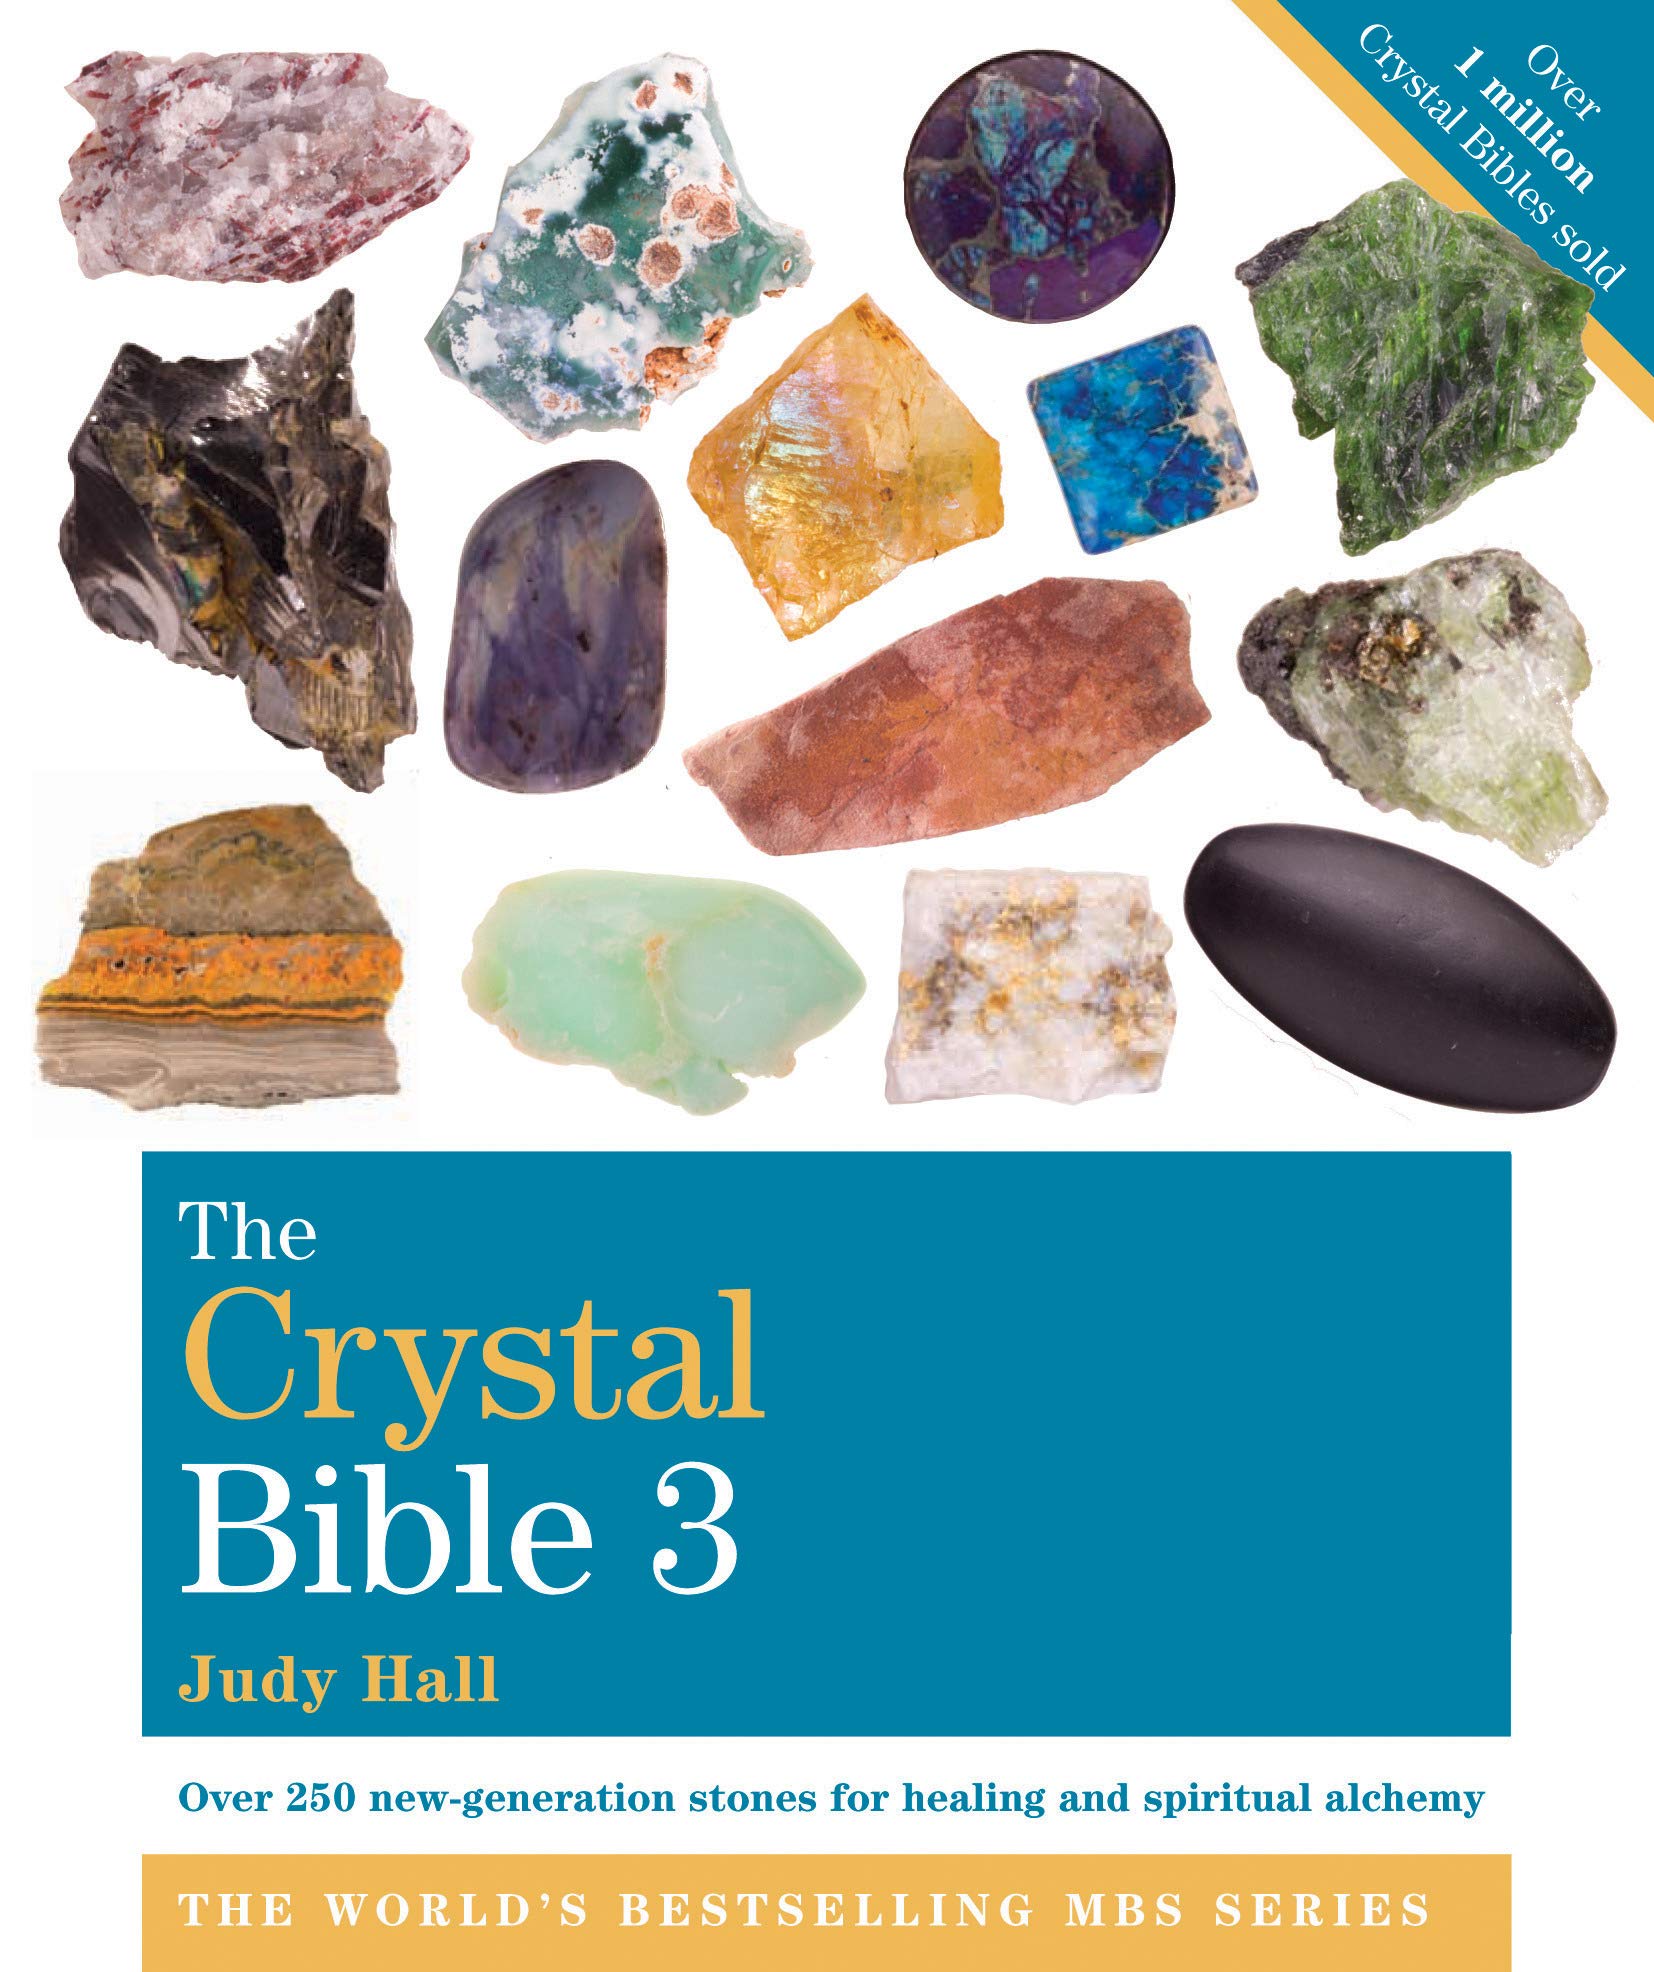 The Crystal Bible 3 - Divine Clarity